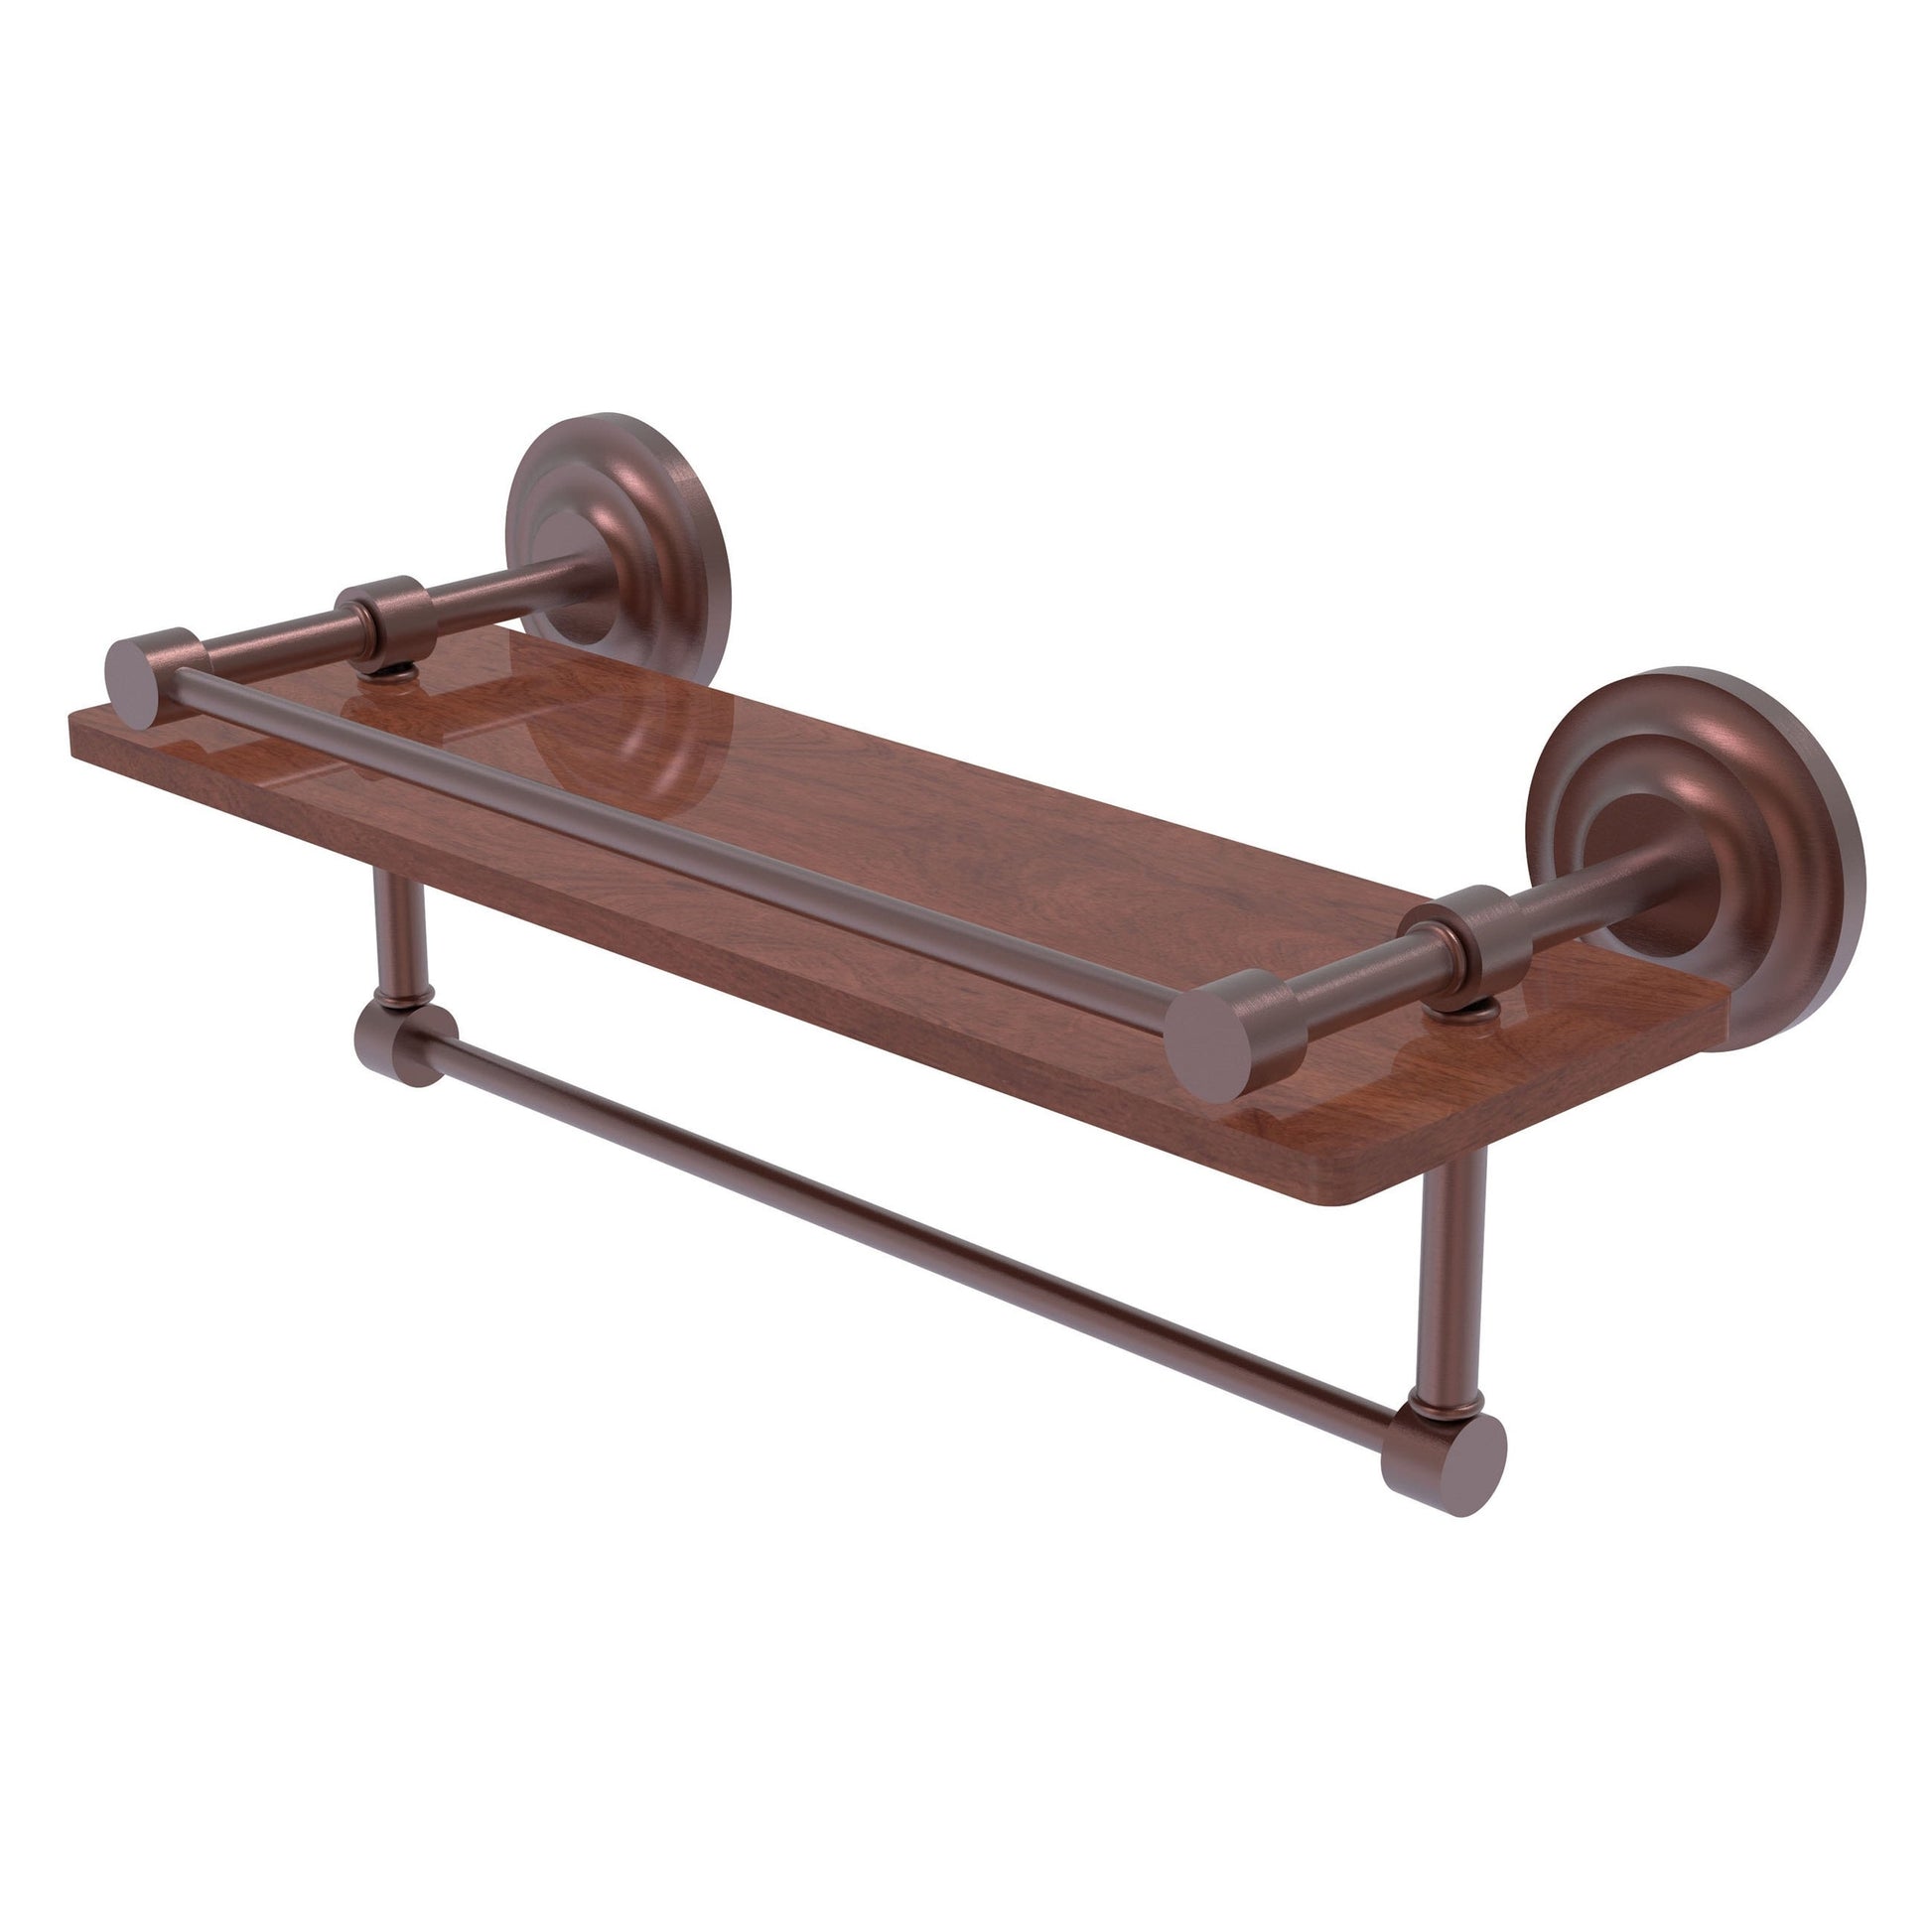 Allied Brass Que New 16" x 5" Antique Copper Solid Brass 16-Inch IPE Ironwood Shelf With Gallery Rail and Towel Bar